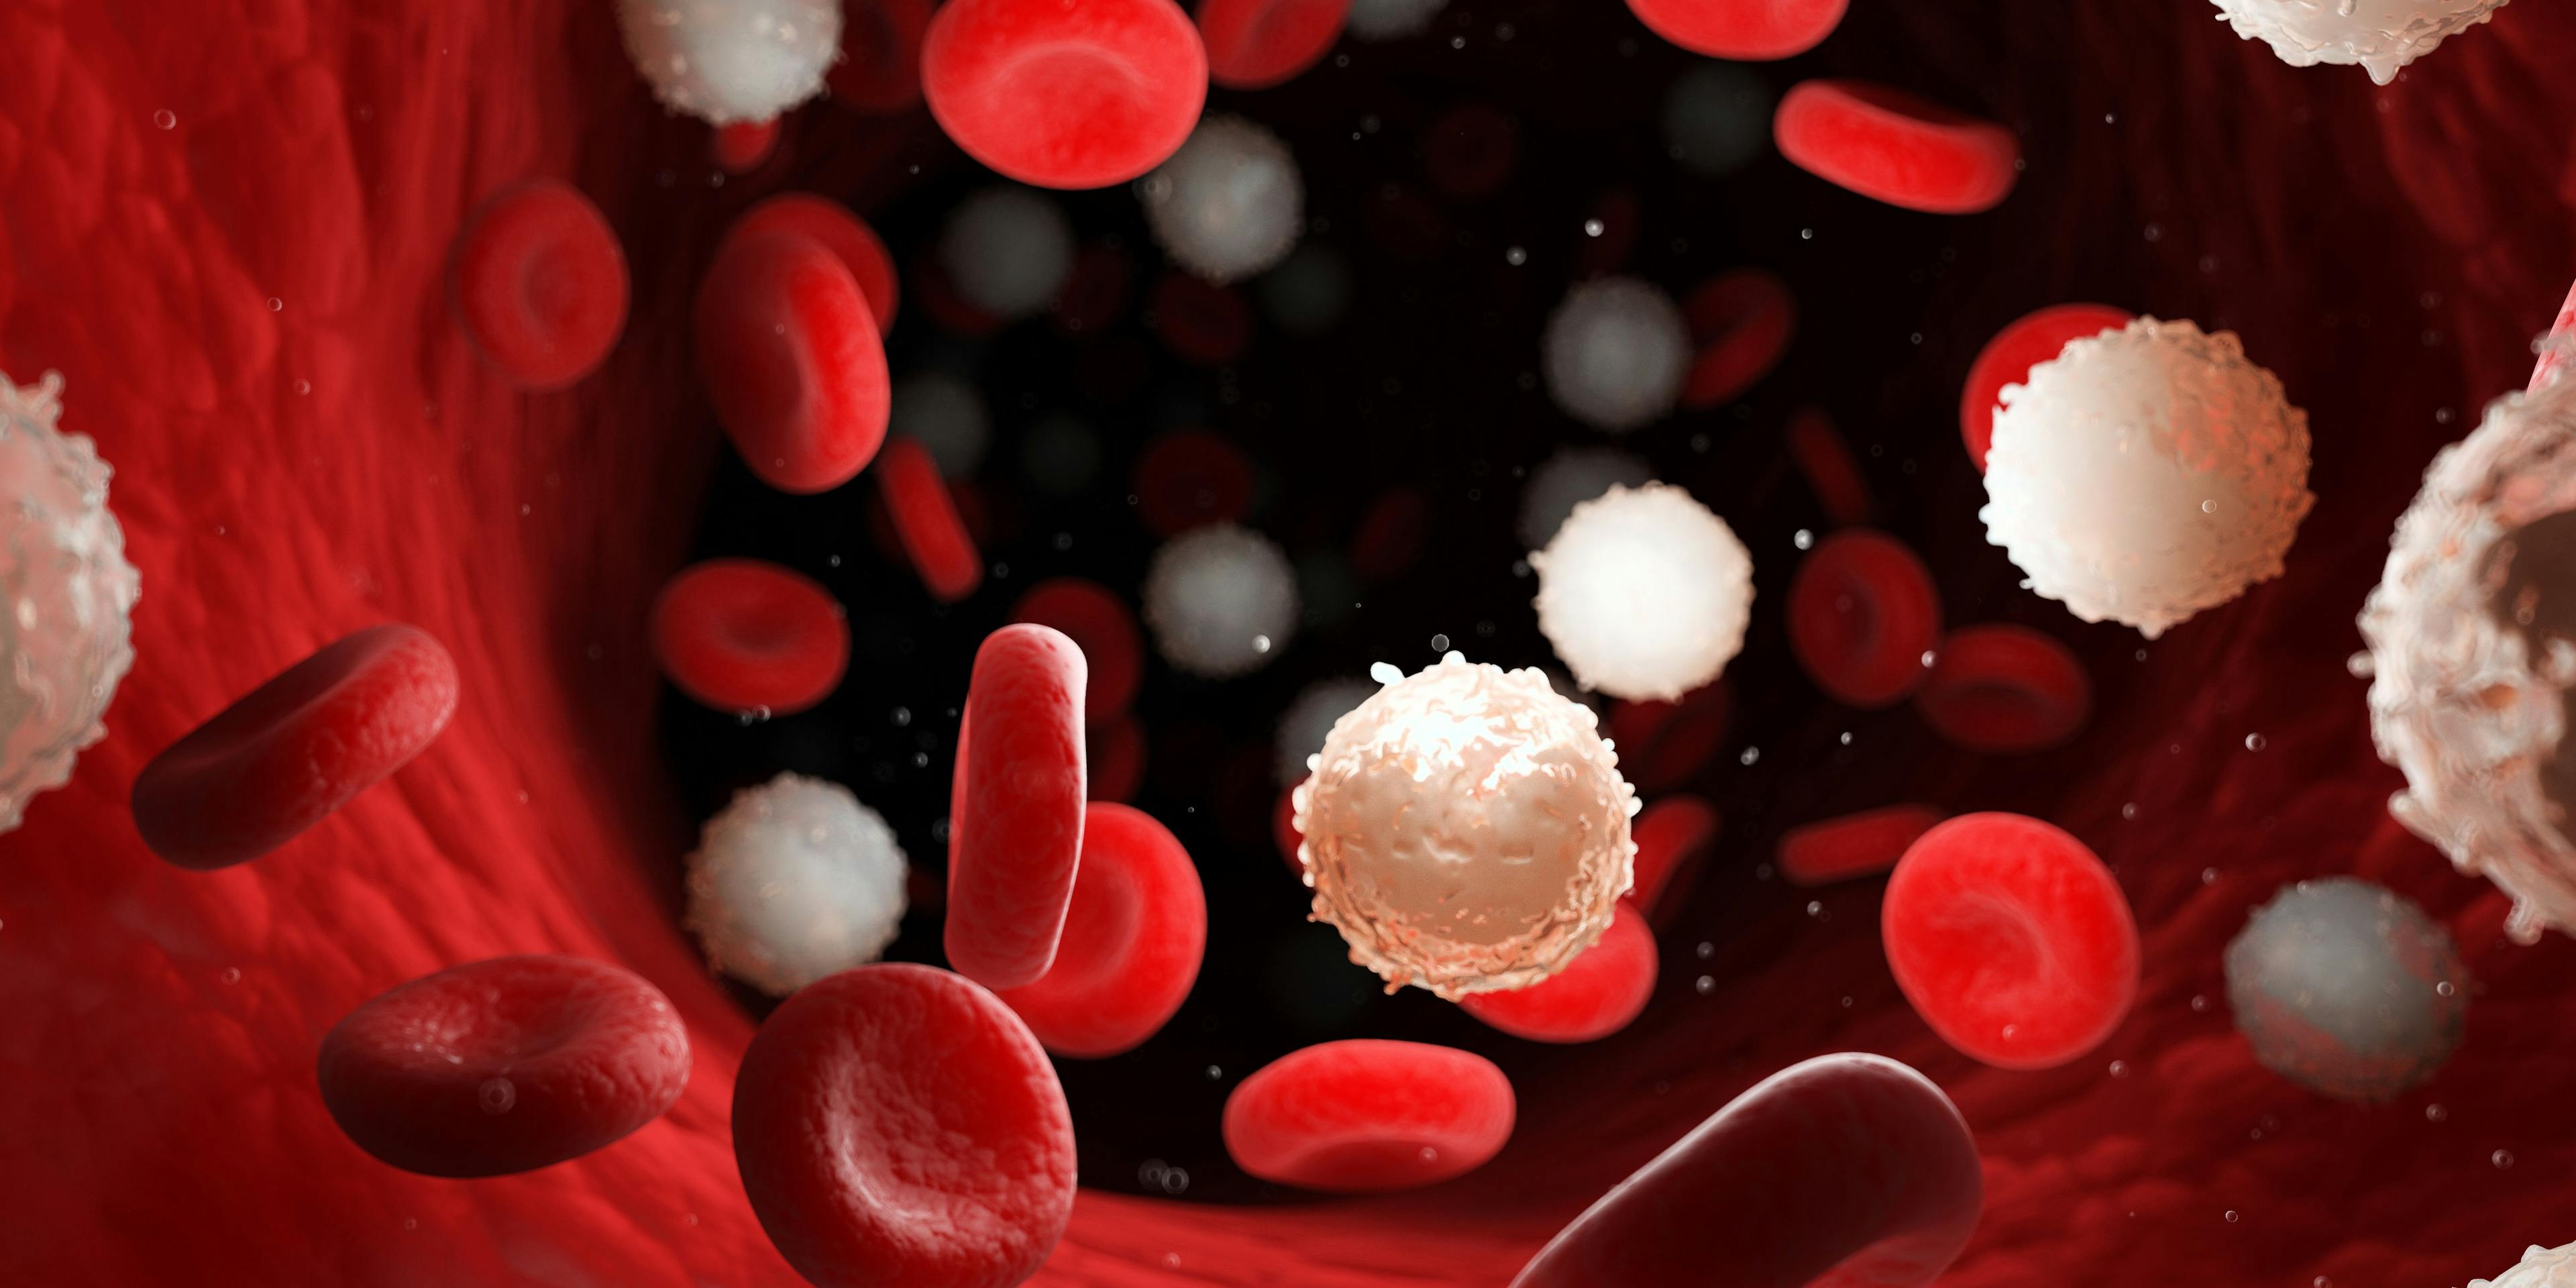 3d rendered medically accurate illustration of too many white blood cells due to leukemia | Image Credit: SciePro - stock.adobe.com